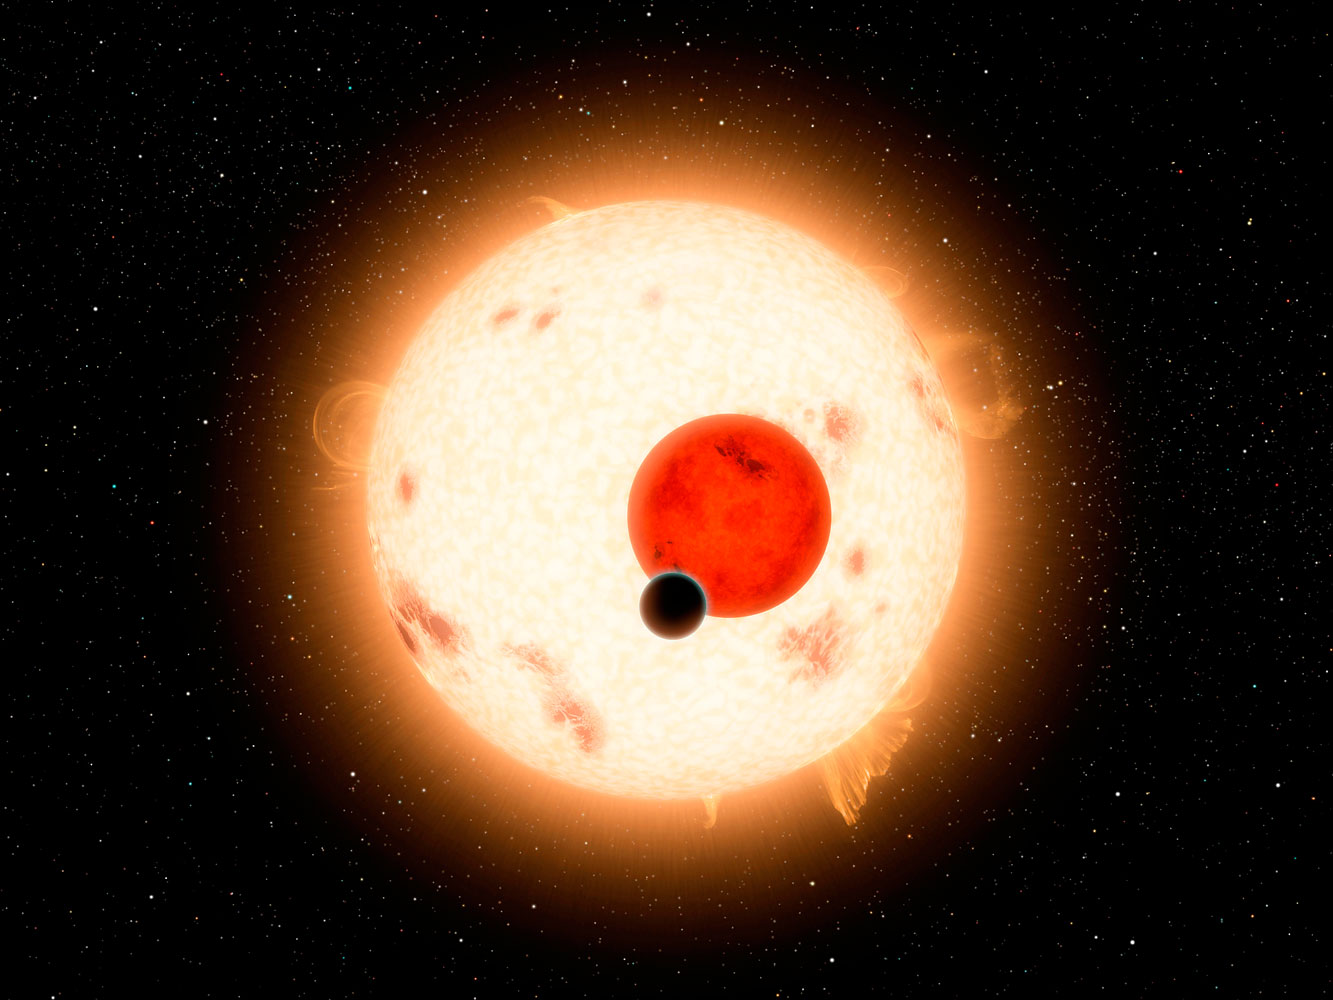 Kepler 16b, one of the many planets discovered by the Kepler space telescope, is one of the few with two suns (Fort Worth Star-Telegram&mdash;MCT/Getty Images)